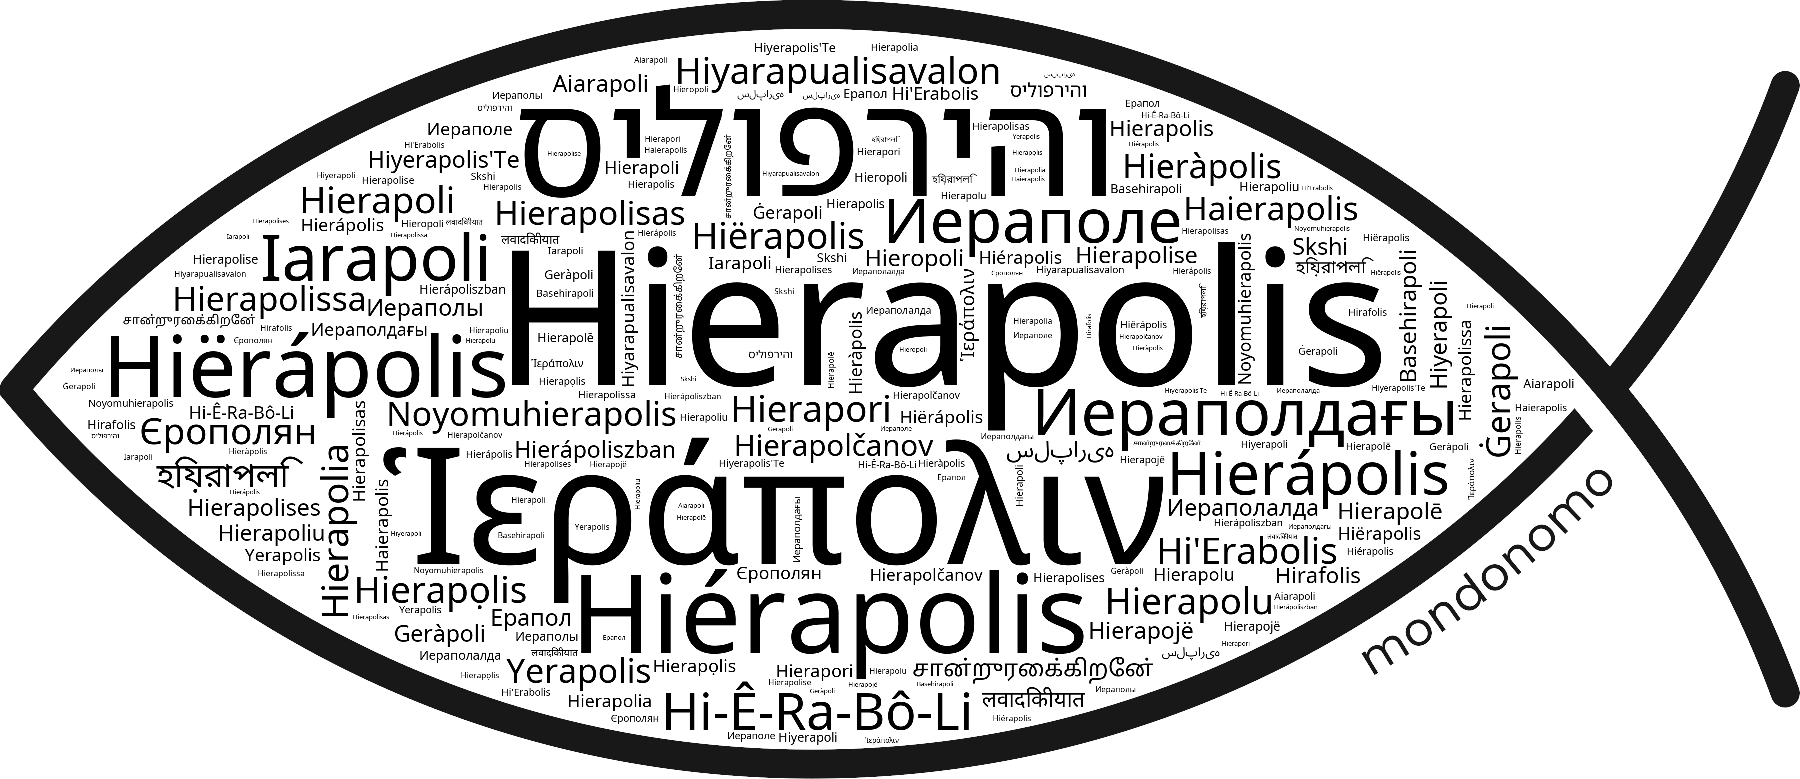 Name Hierapolis in the world's Bibles